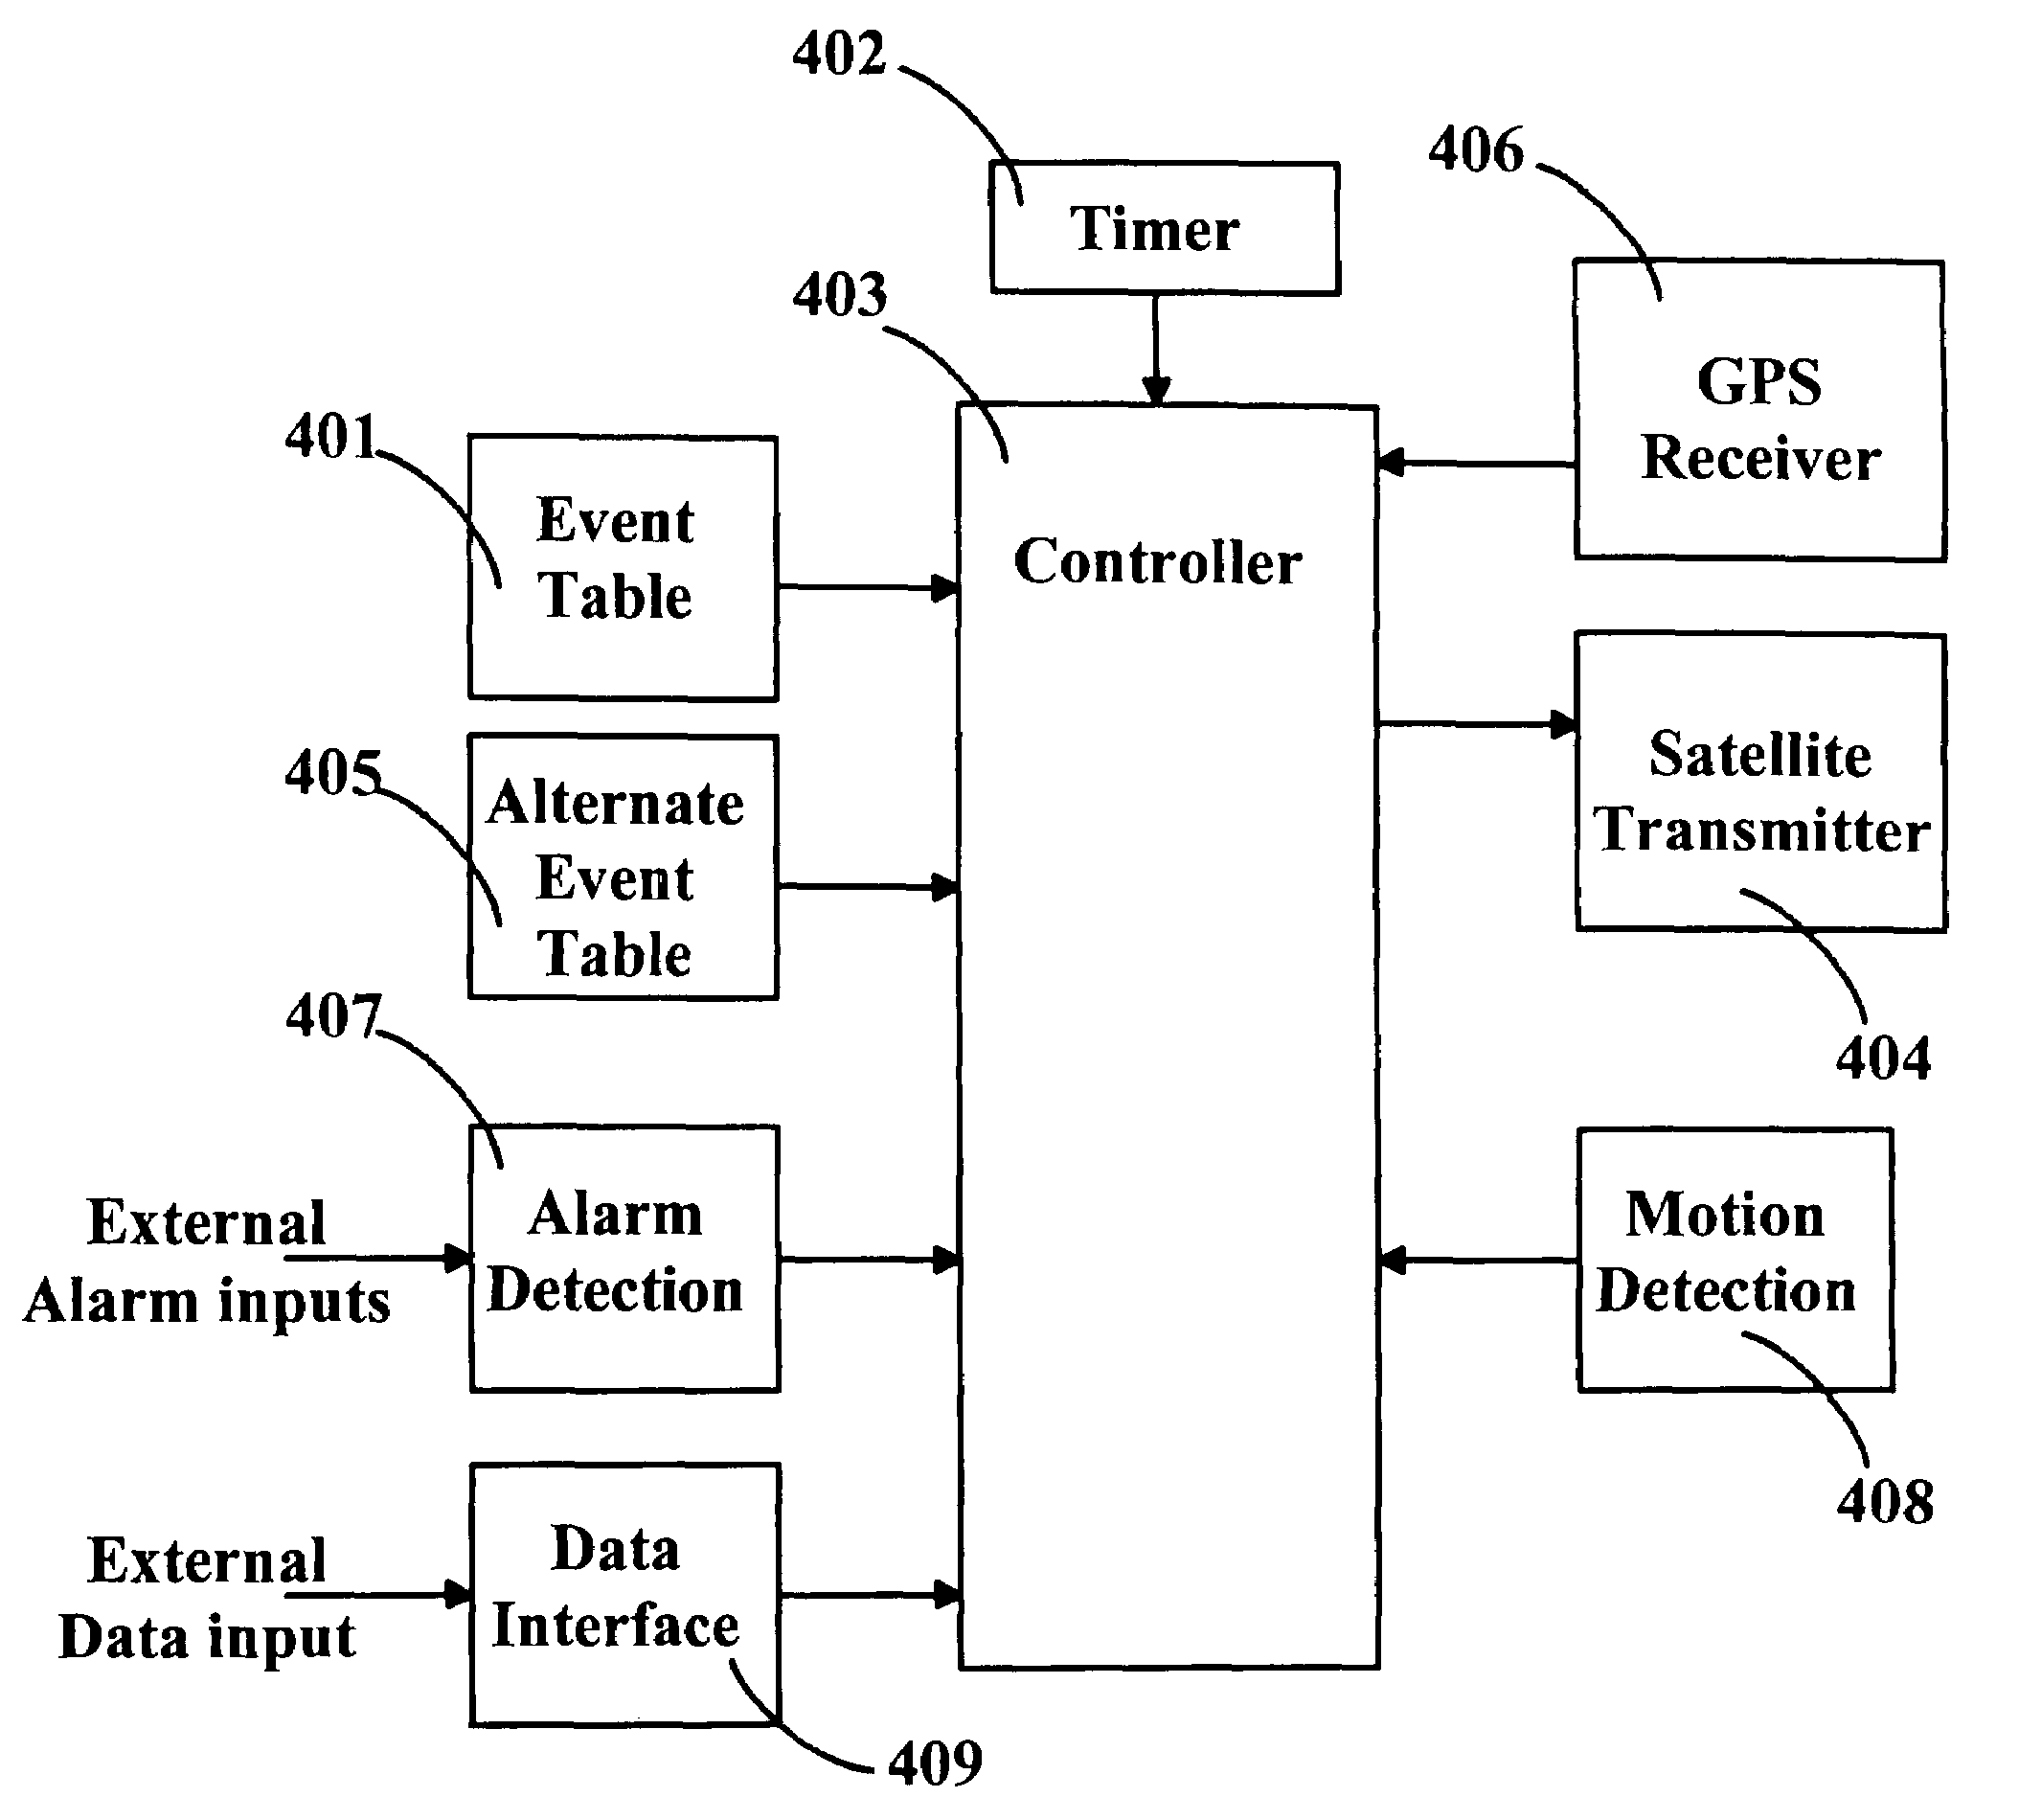 Location monitoring and transmitting device, method, and computer program product using a simplex satellite transmitter